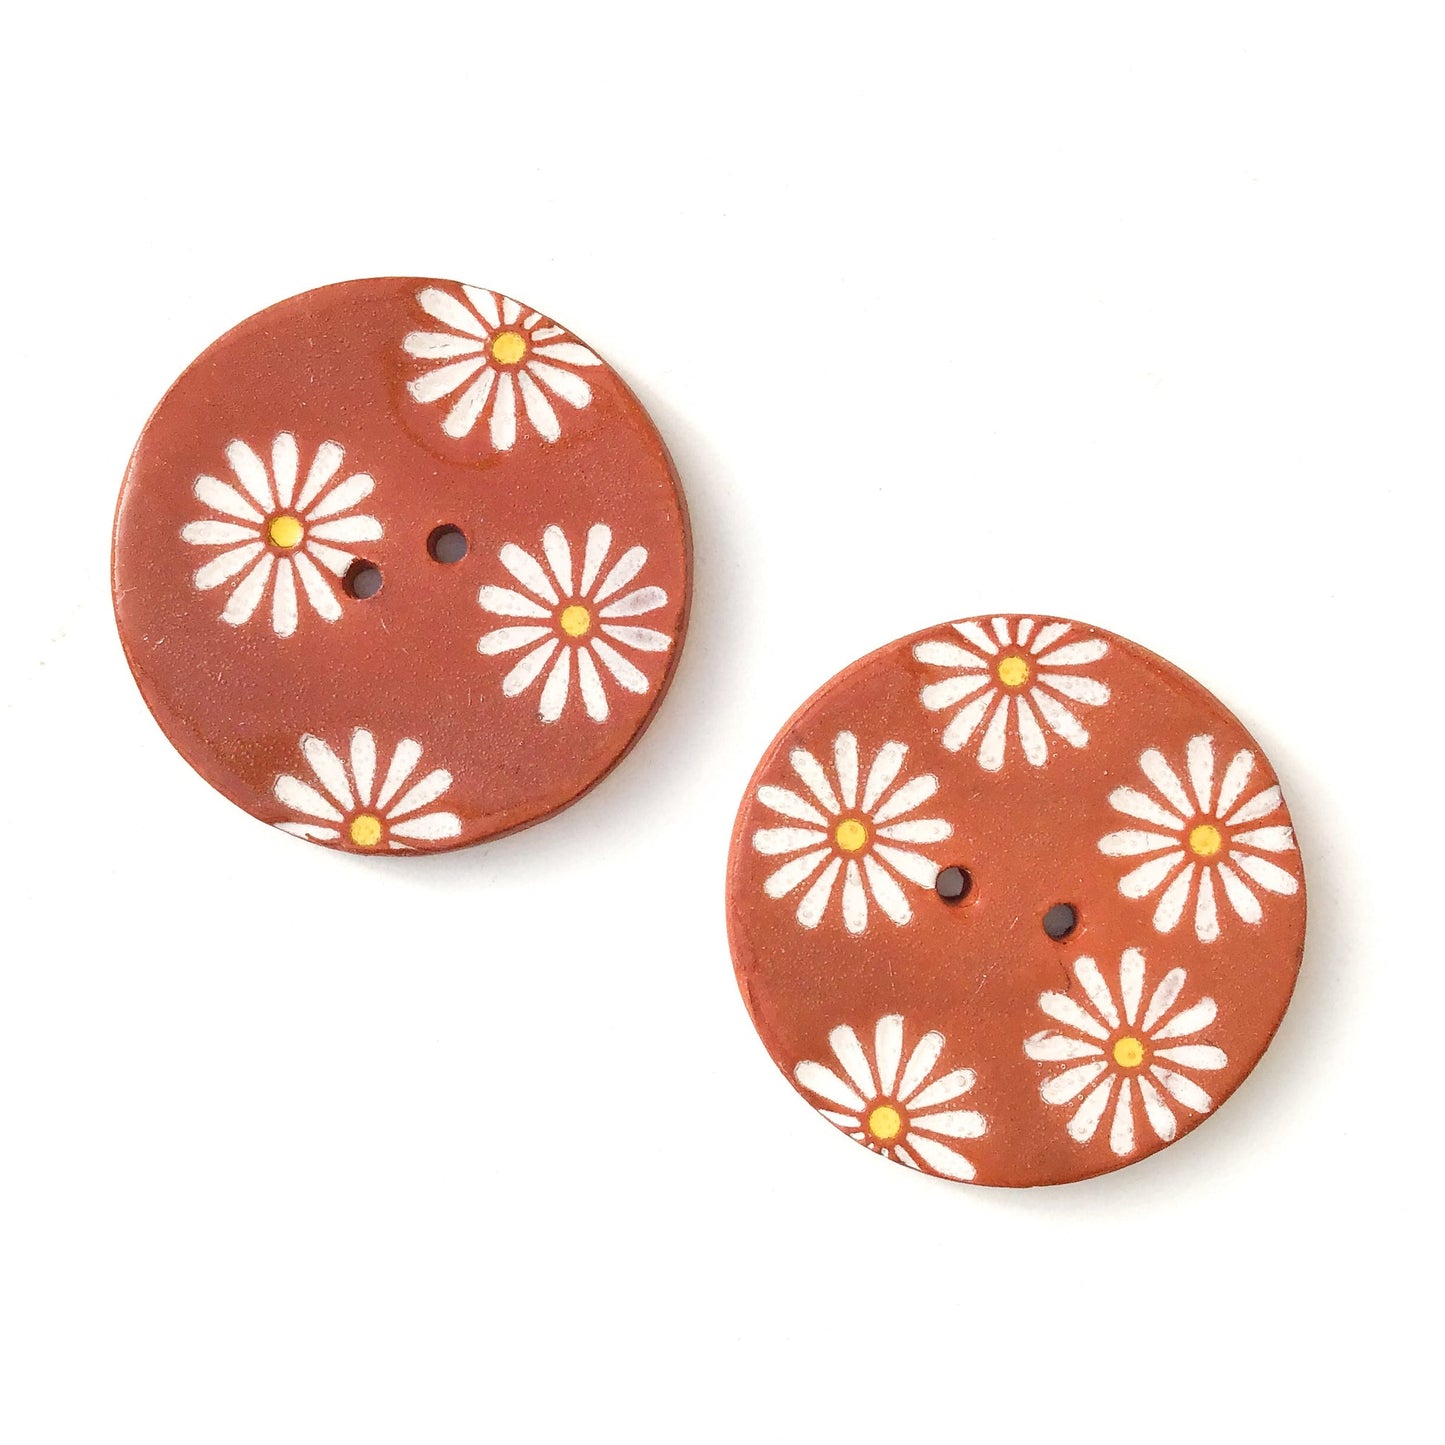 (Wholesale Accounts Only) 1 3/8" Daisy - round - flat - red clay